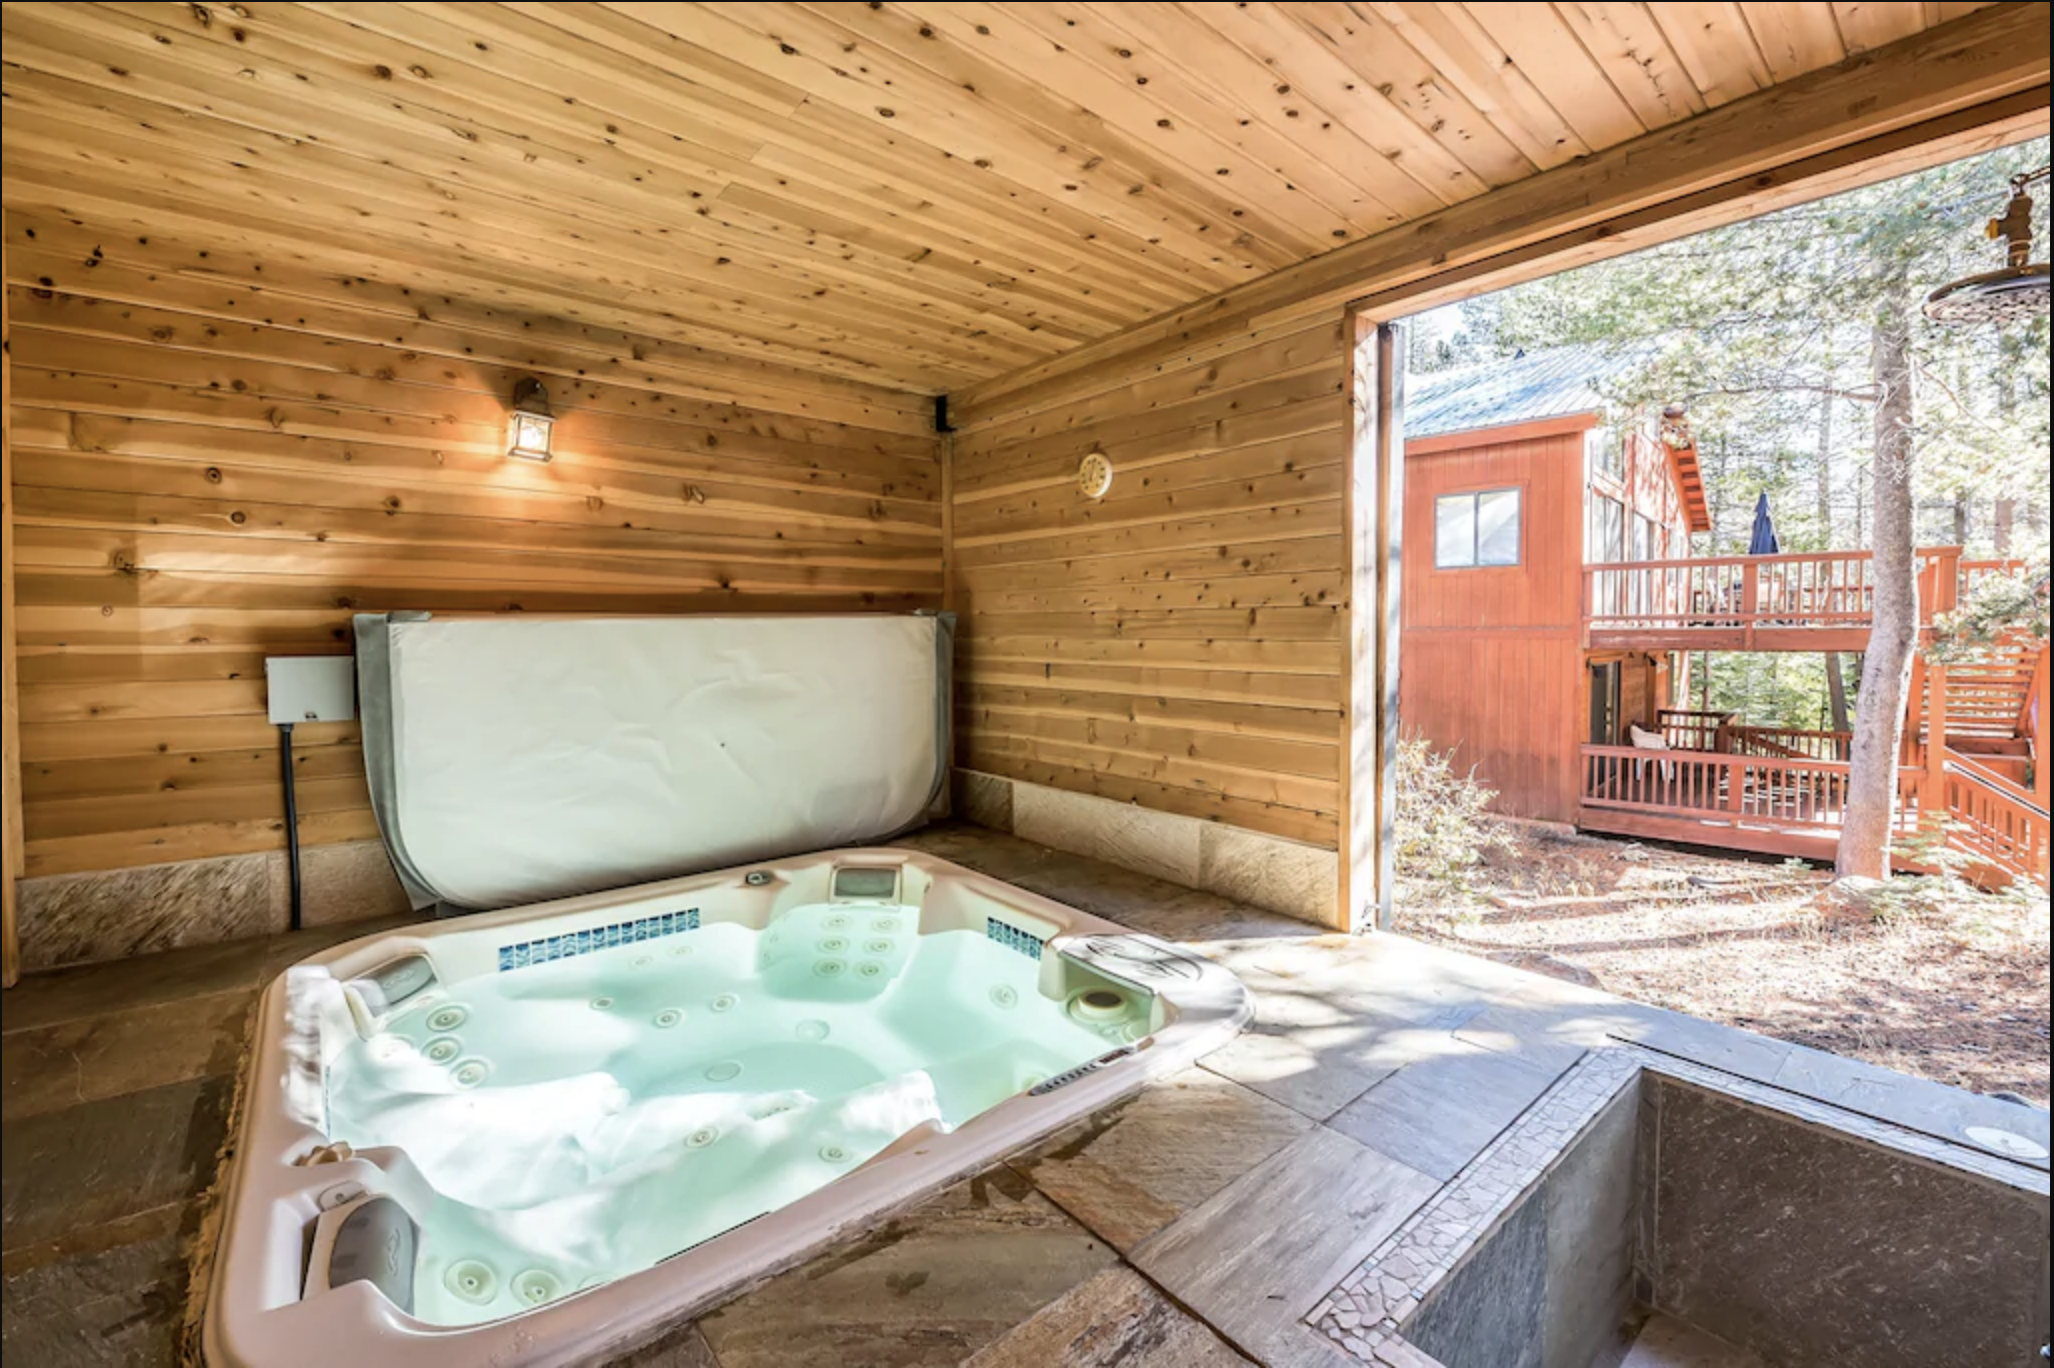 Hot Tub with Barn Door to outside